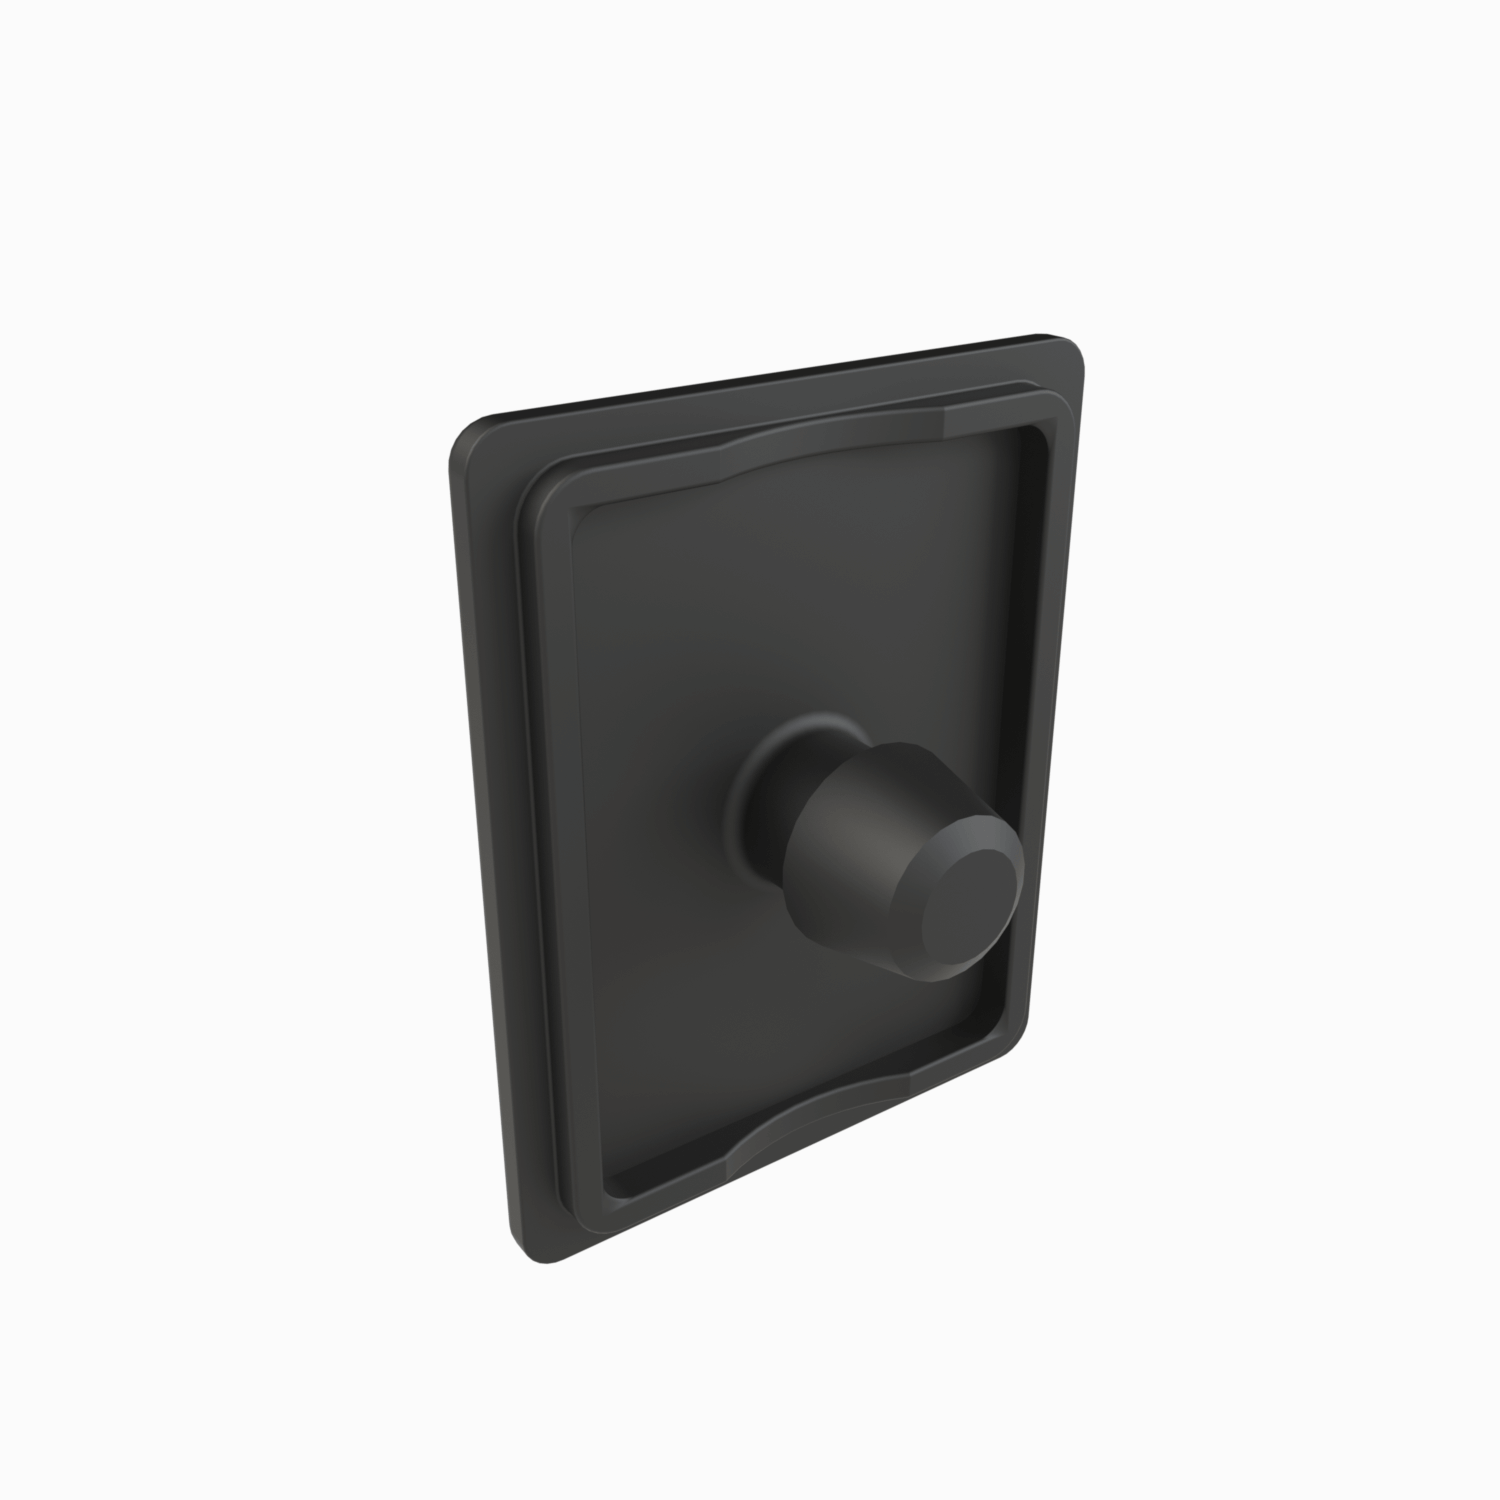 Beam End Cap- Precision crafted for a 50×40 mm beam